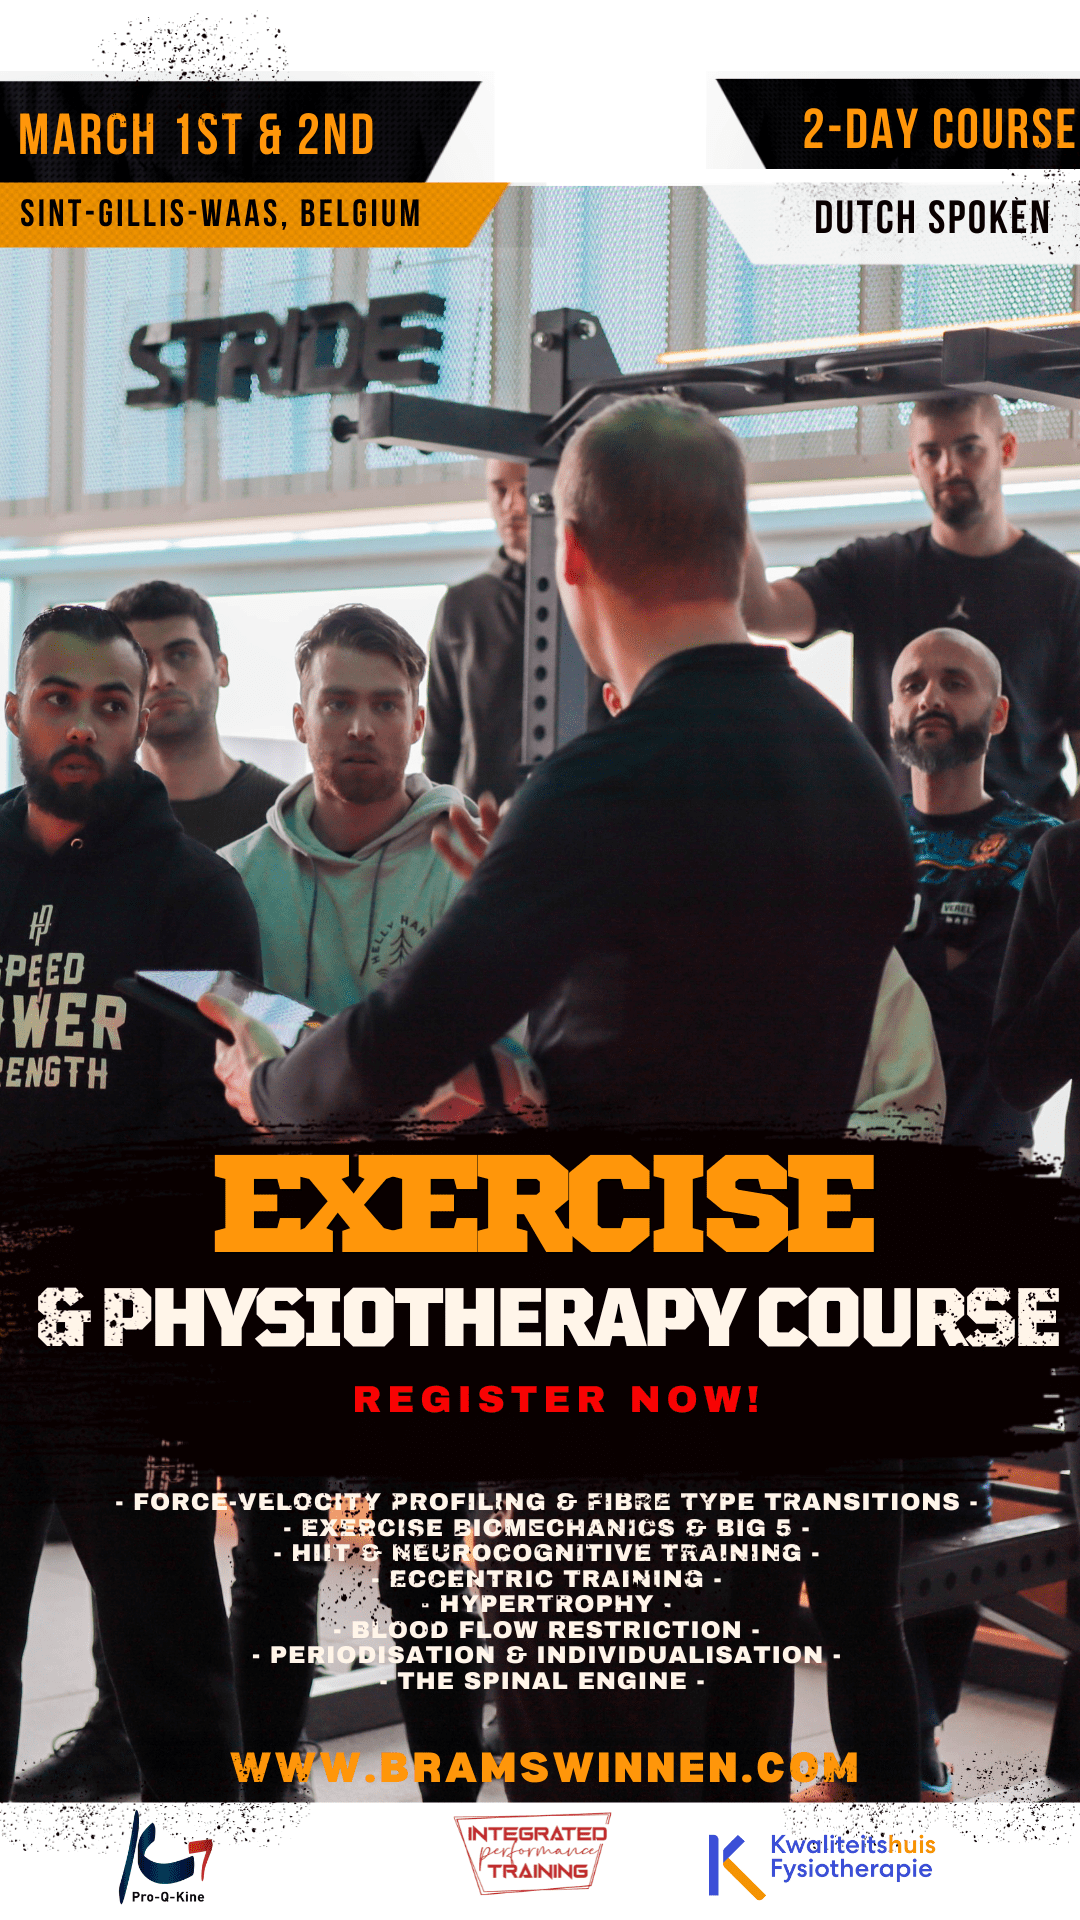 Ticket kopen voor evenement 2-Day Exercise & Physiotherapy Course